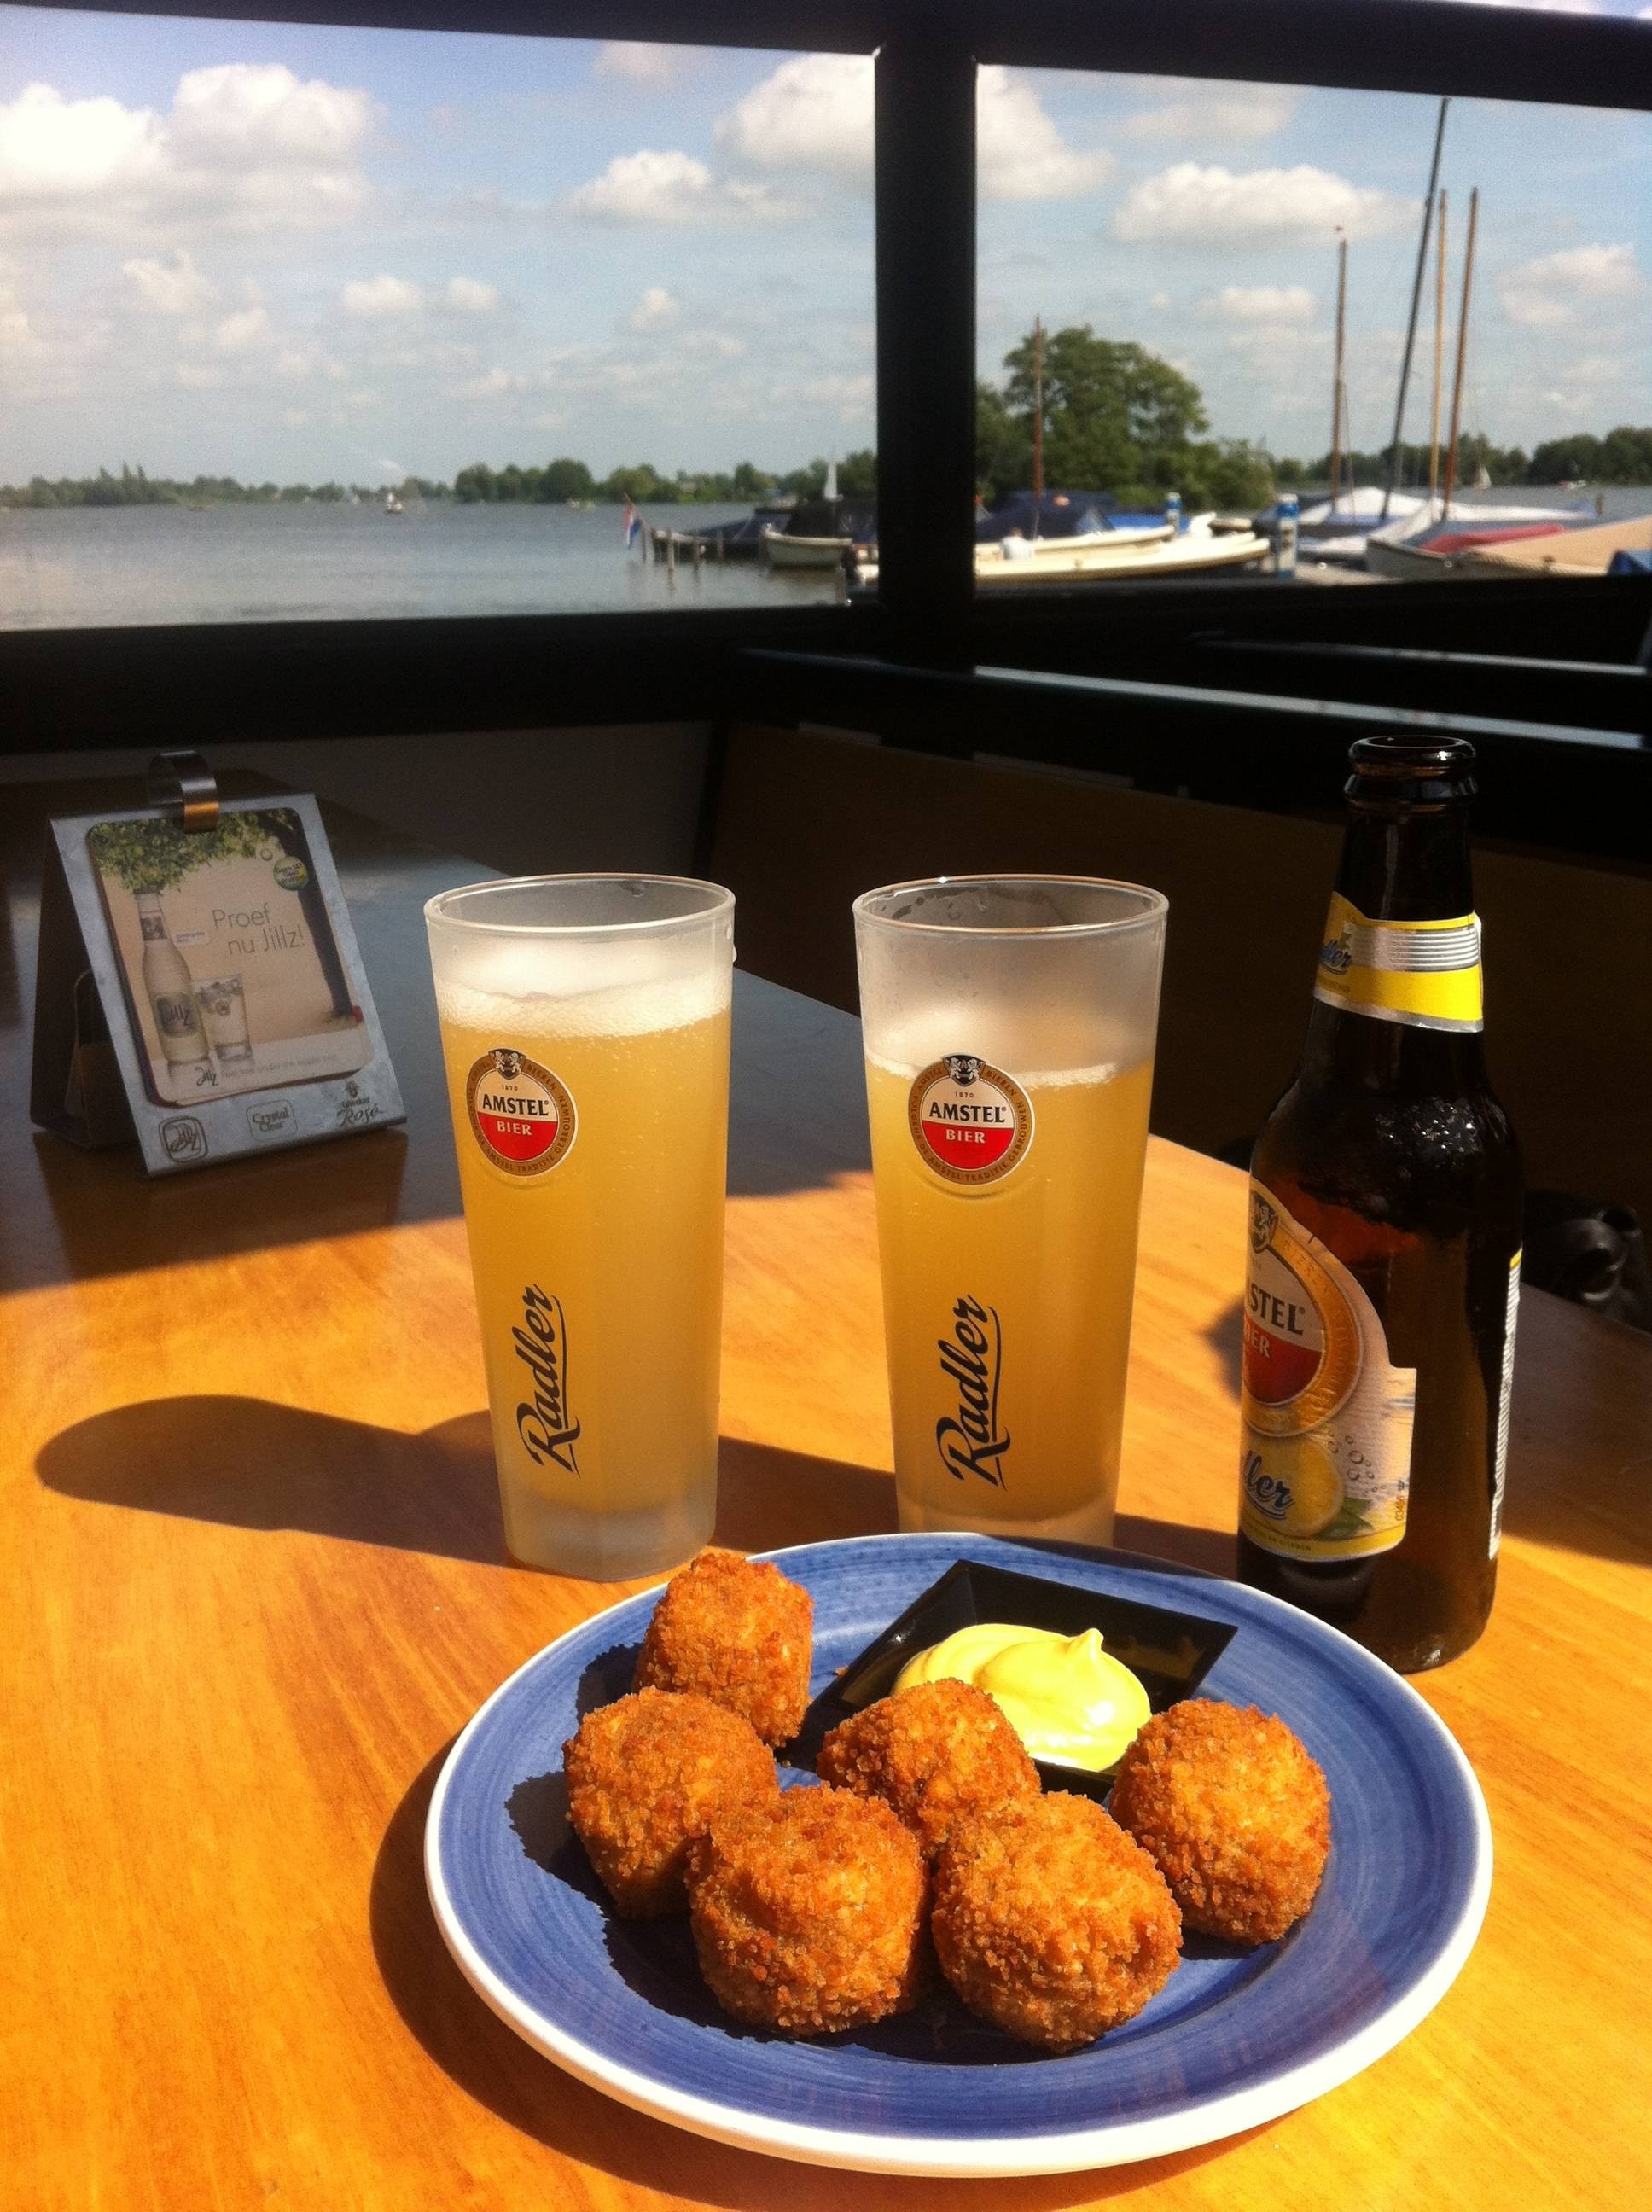 brown fritters with mayo mustard sauce with glasses of beers on side